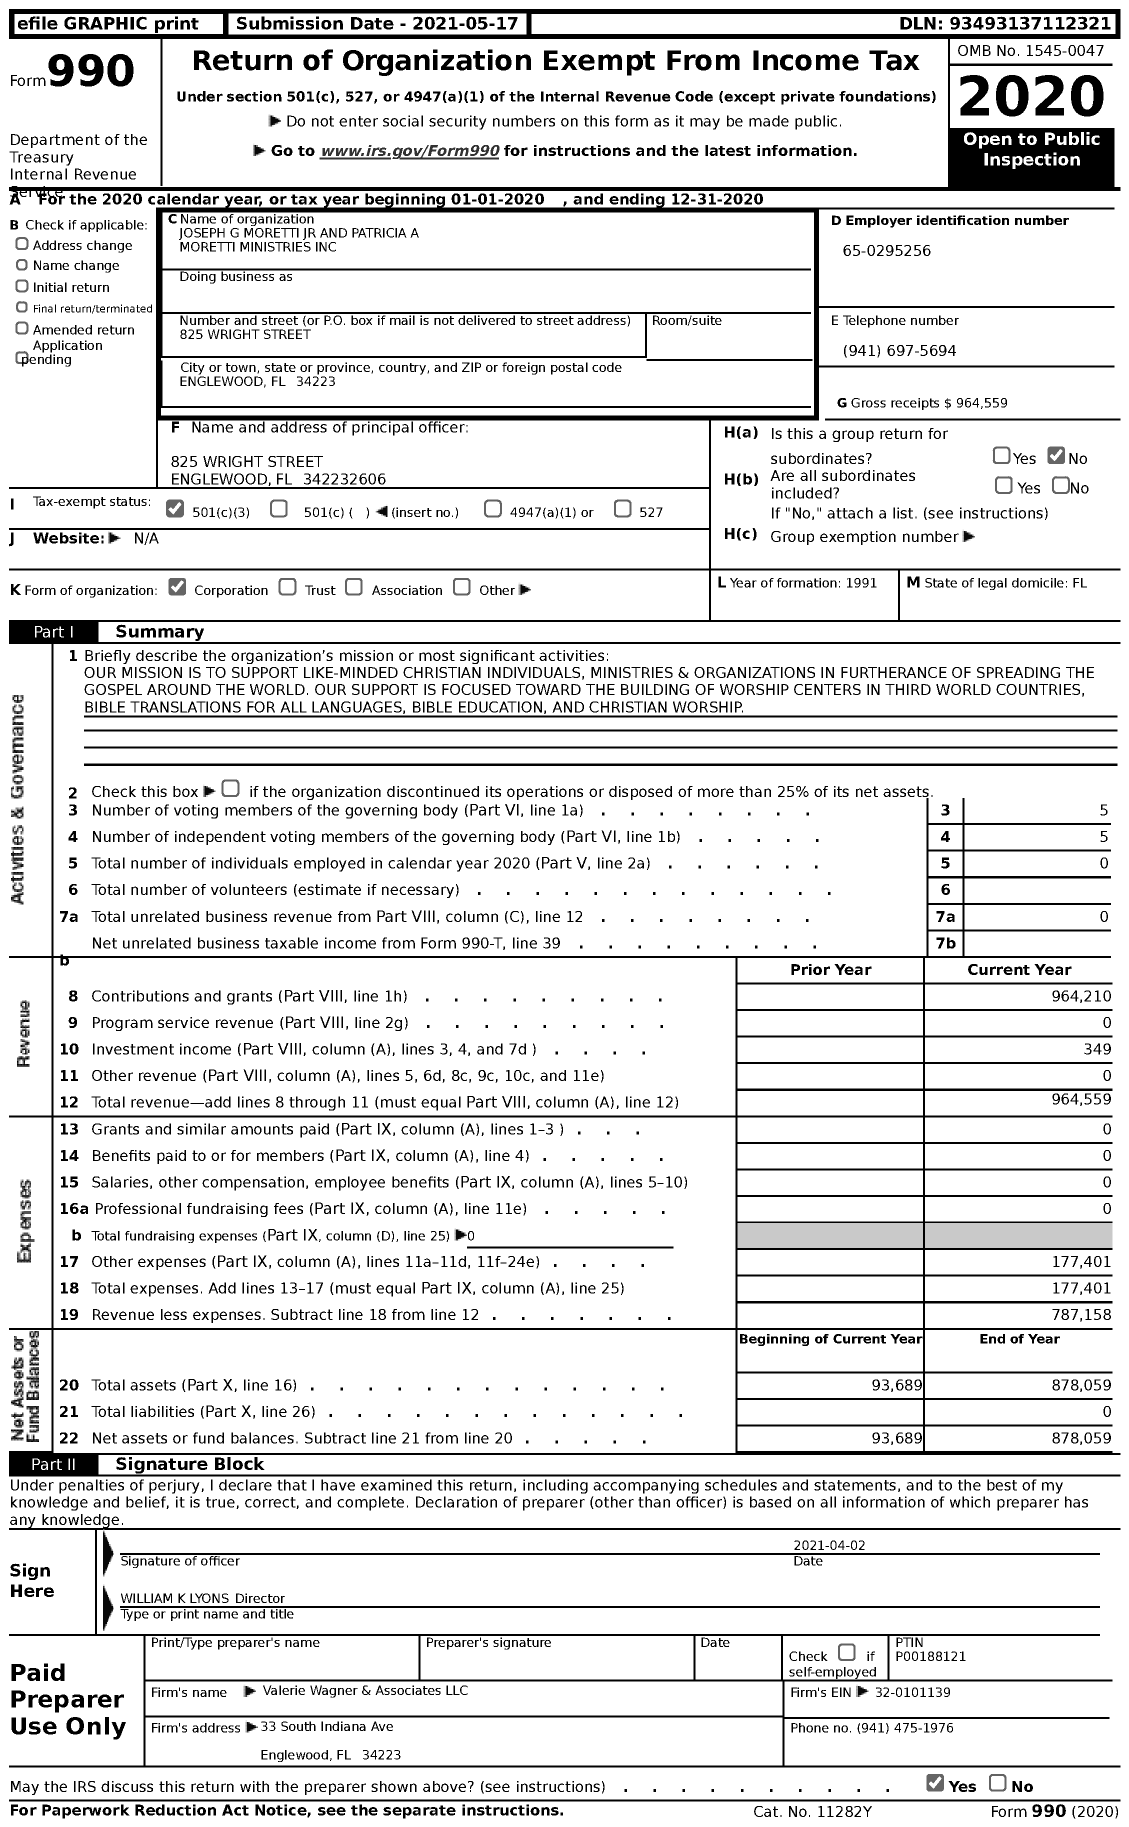 Image of first page of 2020 Form 990 for Joseph G Moretti JR and Patricia A Moretti Ministries